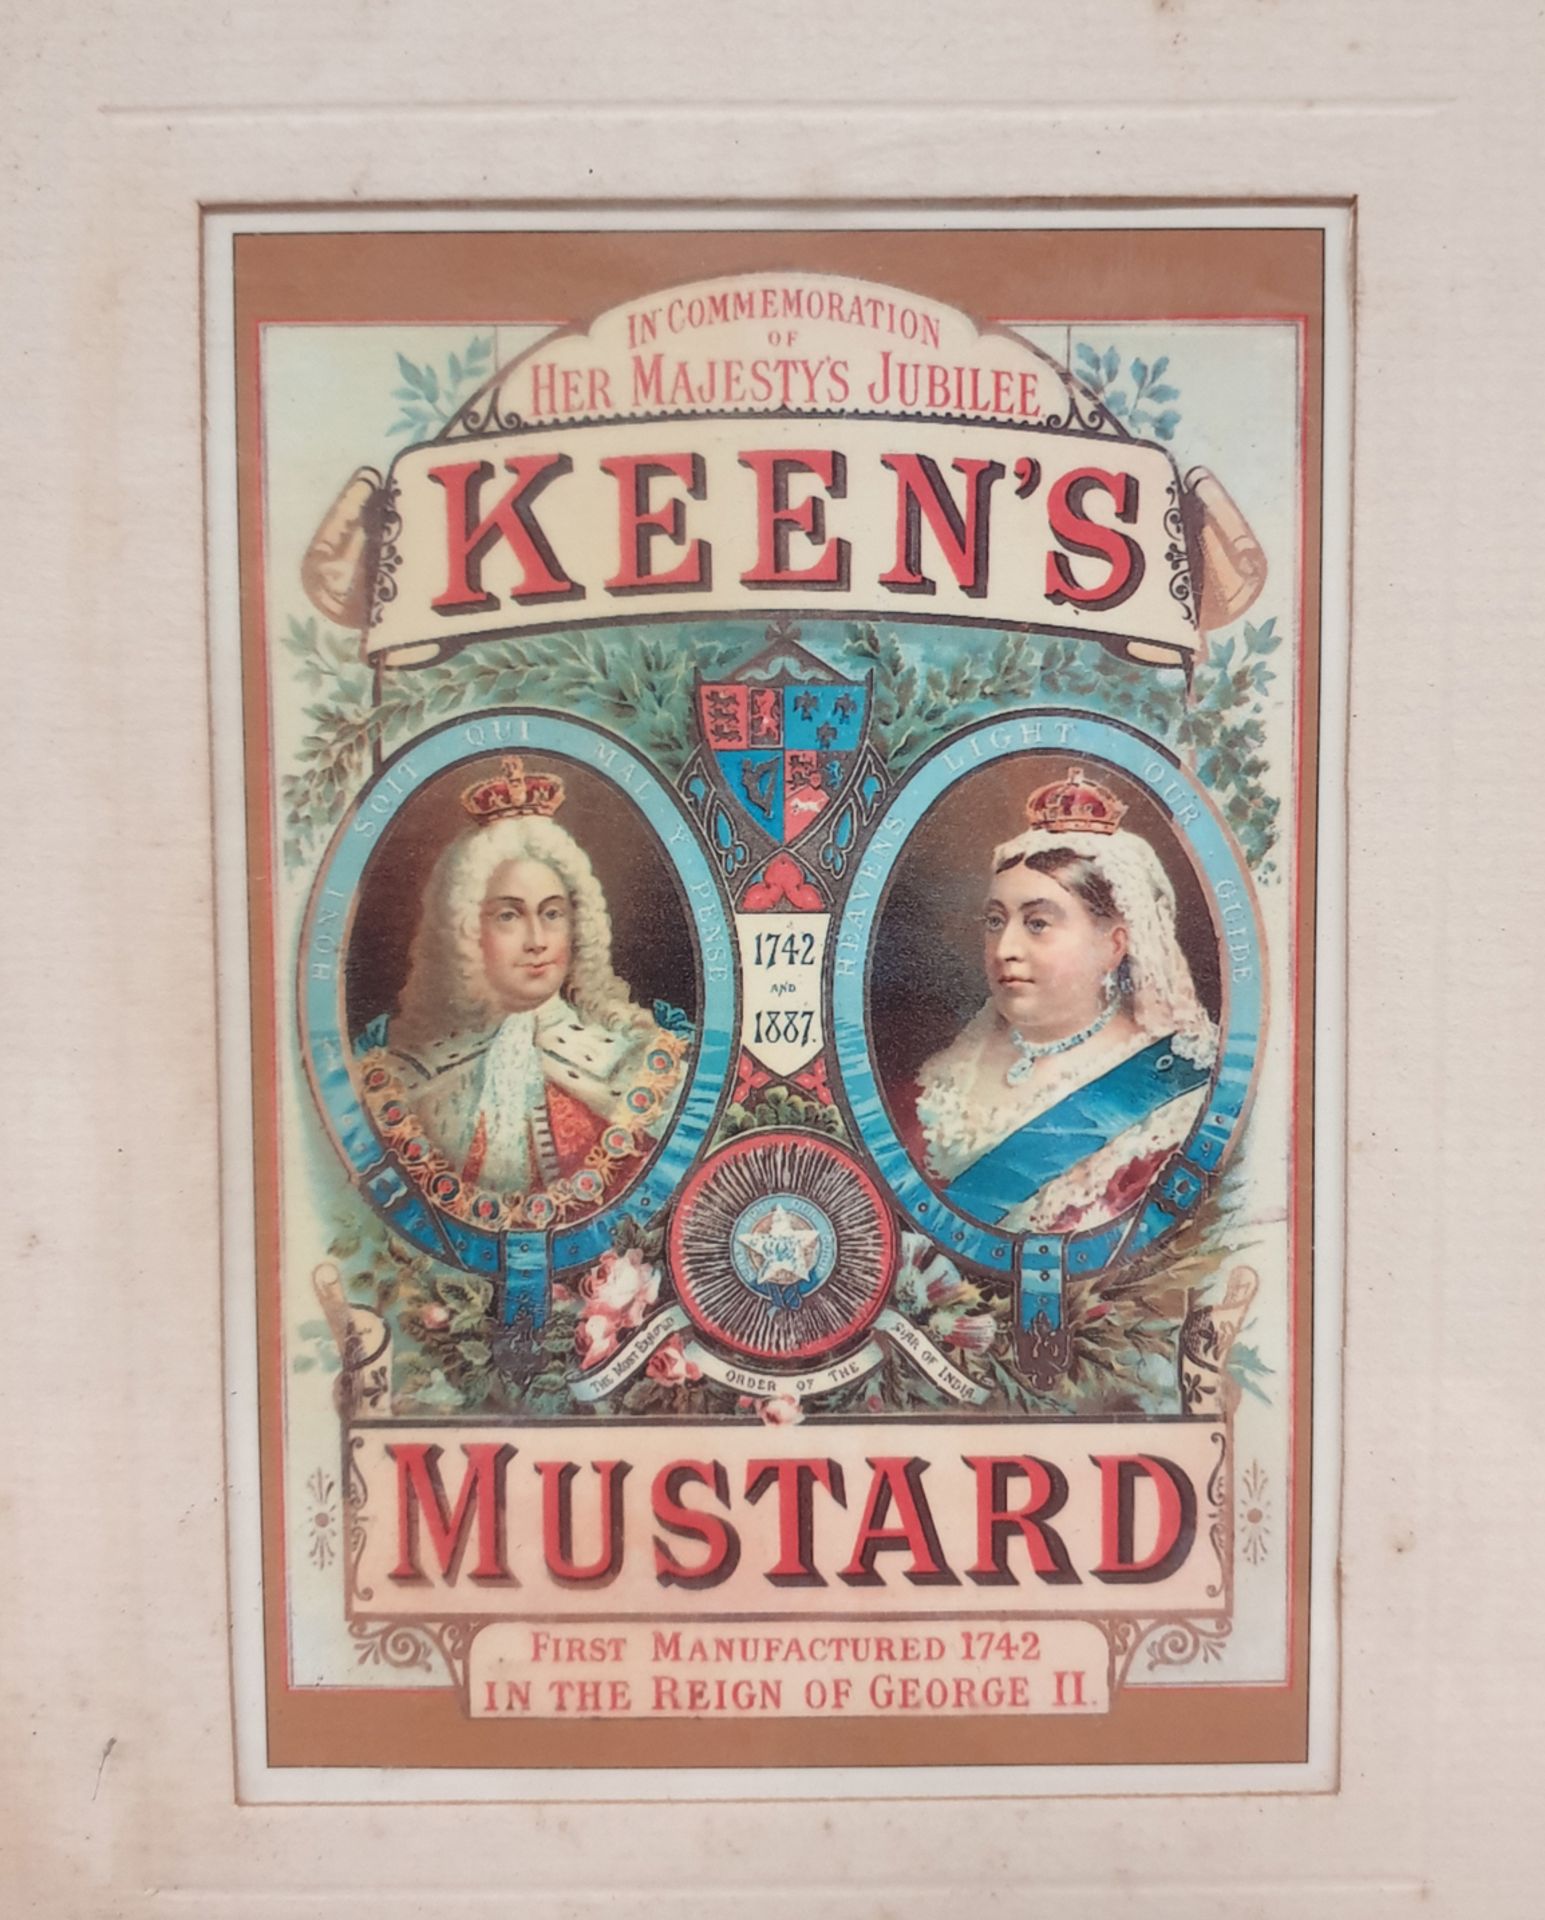 KEENS MUSTARD in Commemoration of Her Majestys Jubilee Framed Picture. - Image 2 of 3